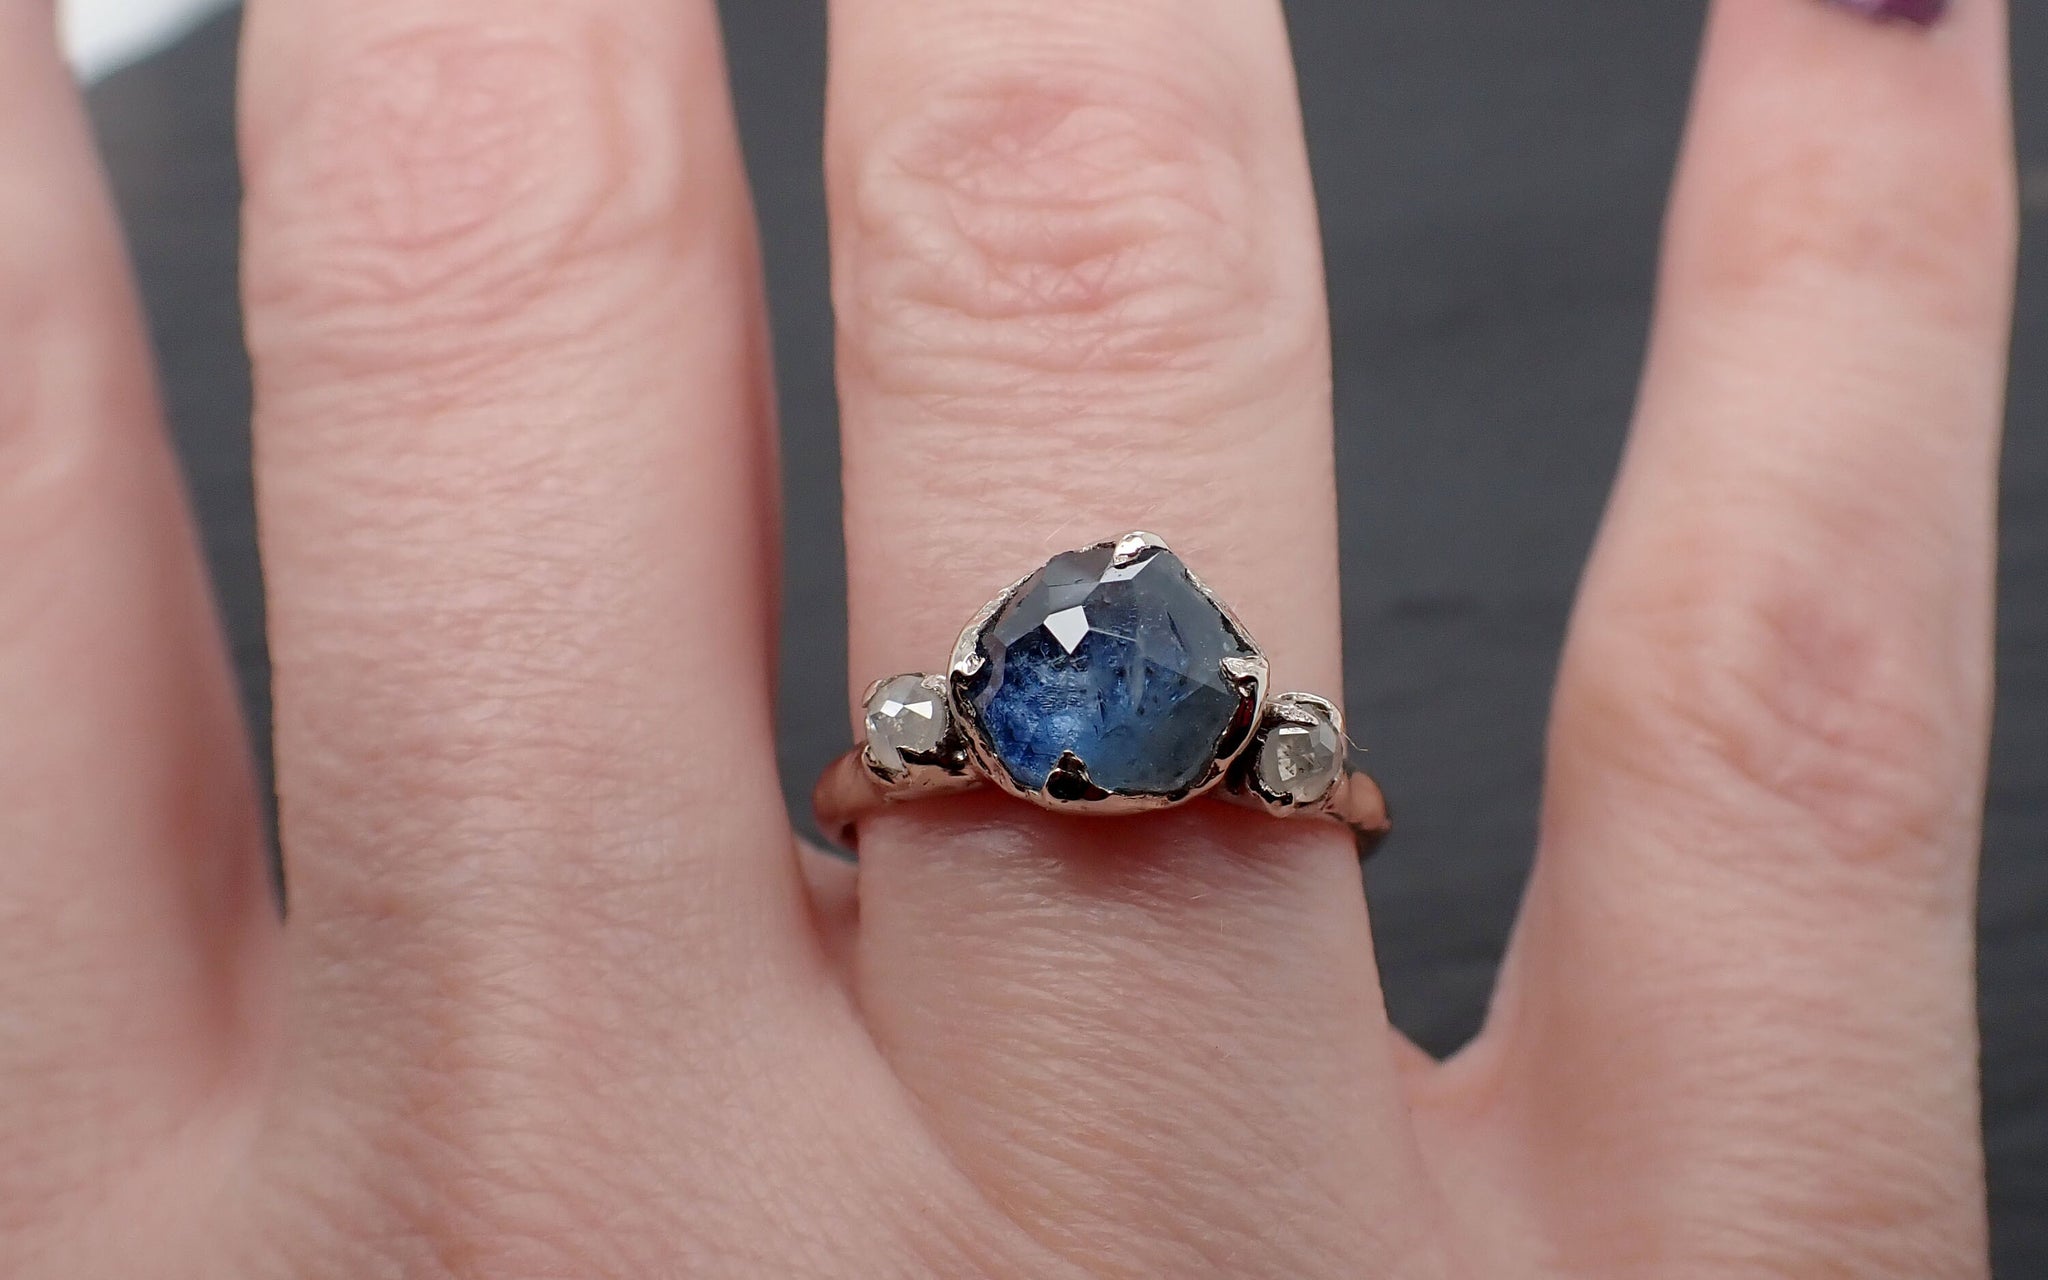 Partially faceted blue Montana Sapphire and fancy Diamonds 14k White Gold Engagement Wedding Ring Custom Gemstone Ring Multi stone Ring 3396